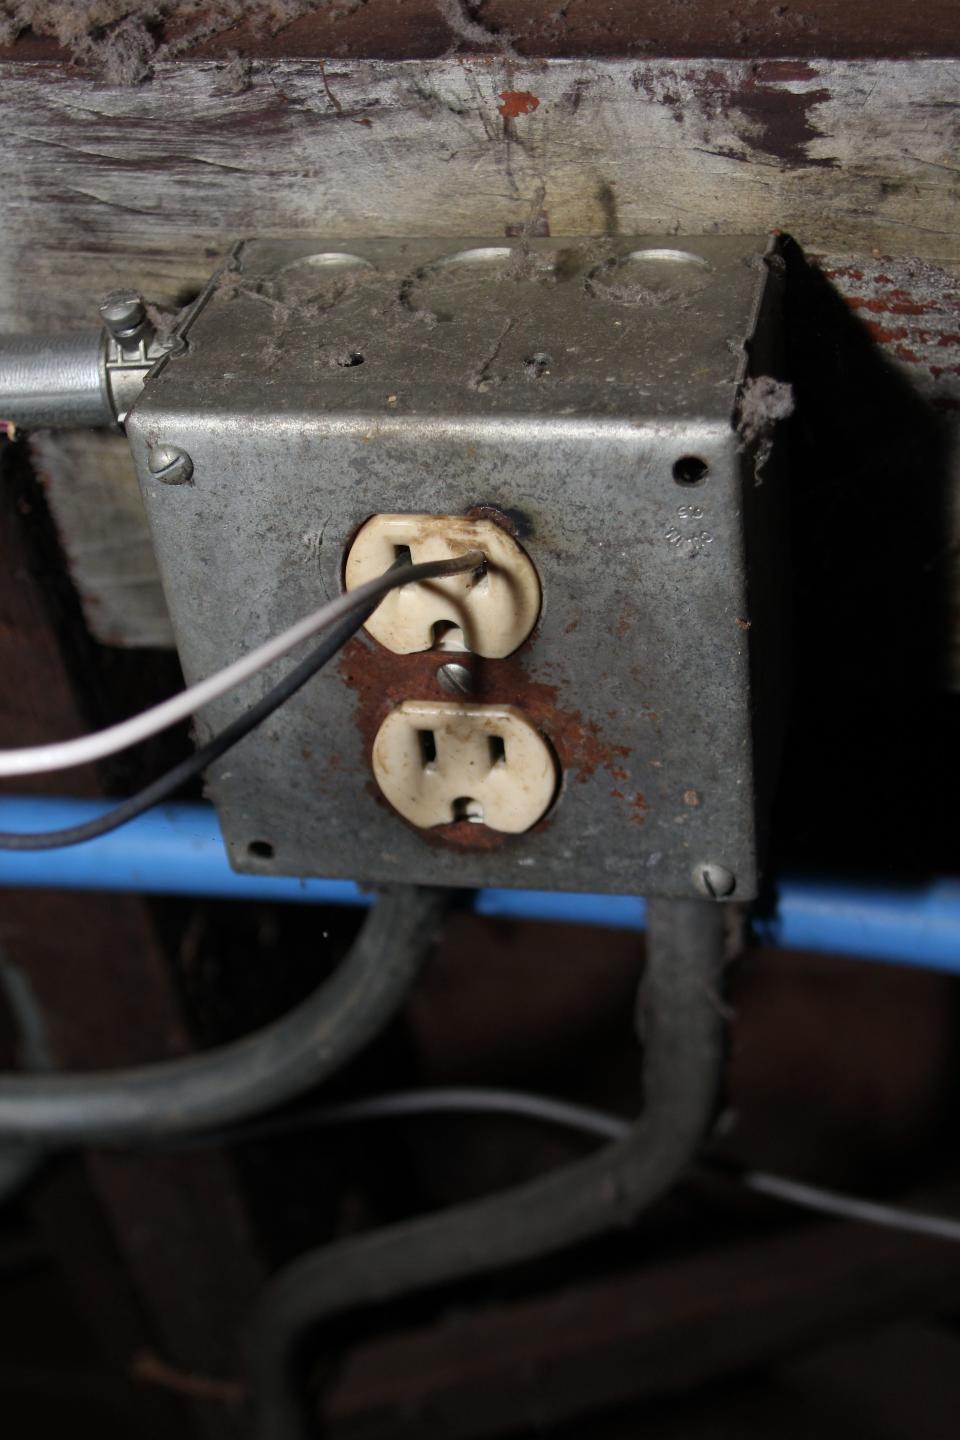 Dangerous wiring found after the fire